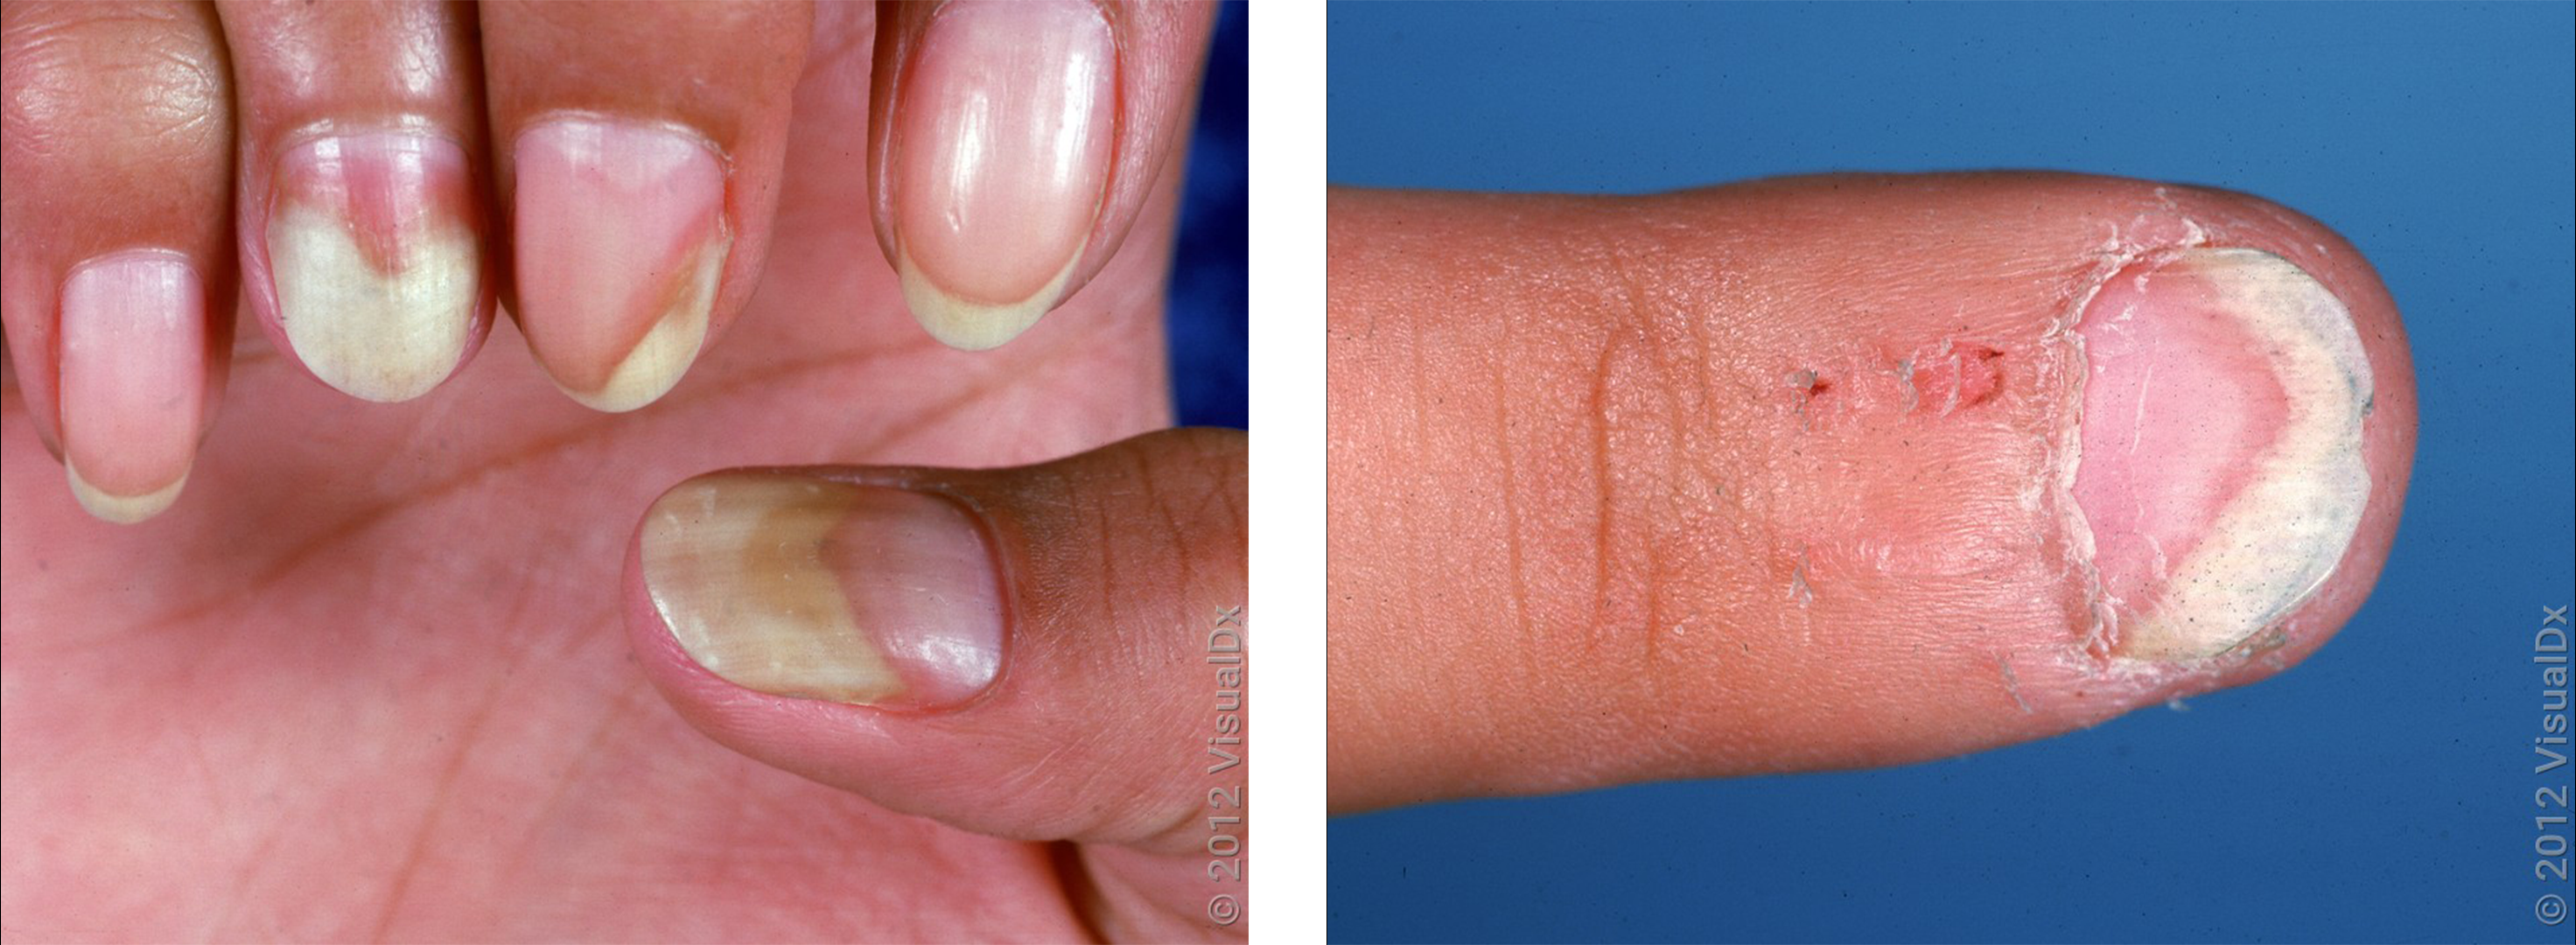 Nail Psoriasis: Symptoms, Pictures, Remedies, and More